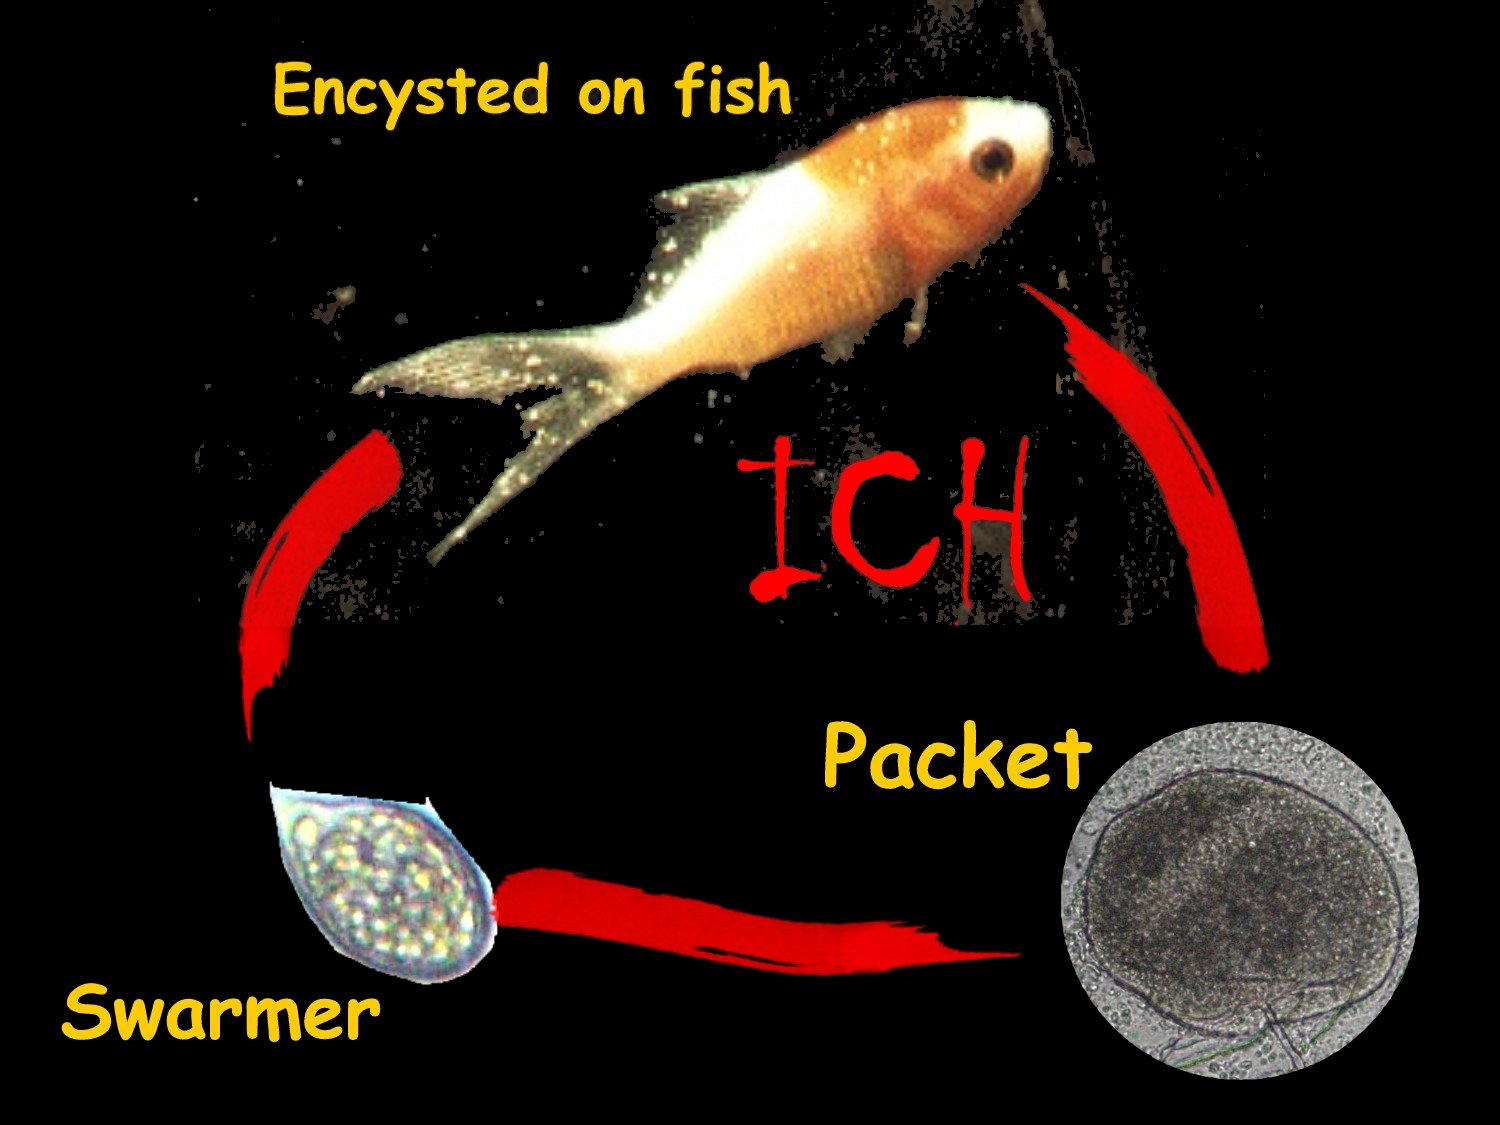 Ich's Life Cycle involves a cycle ON and OFF the fish